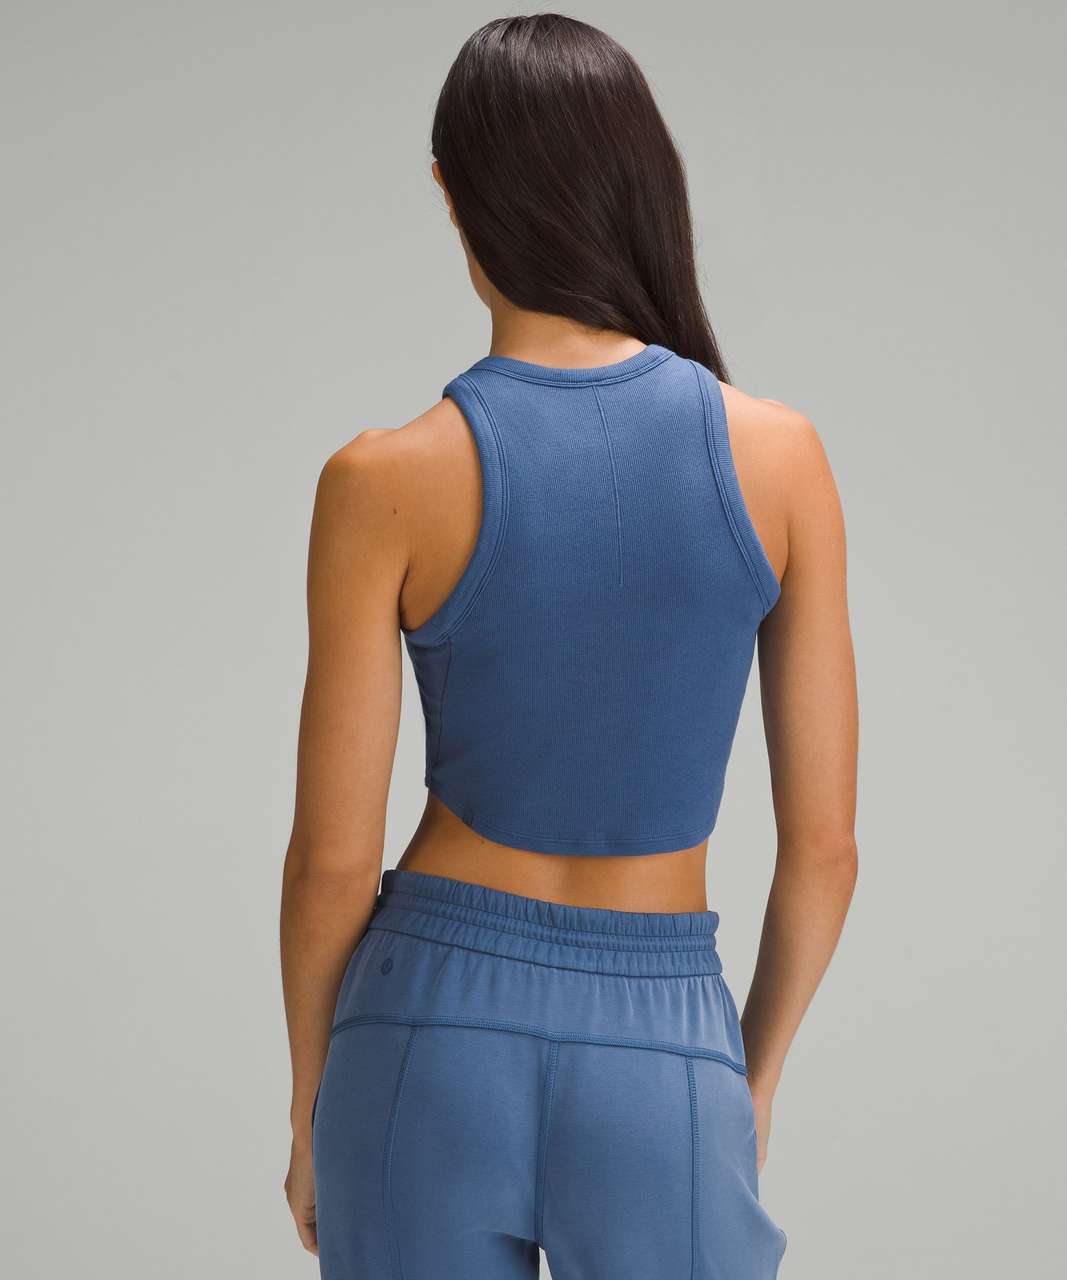 Lululemon Hold Tight Cropped Tank Top - Pitch Blue